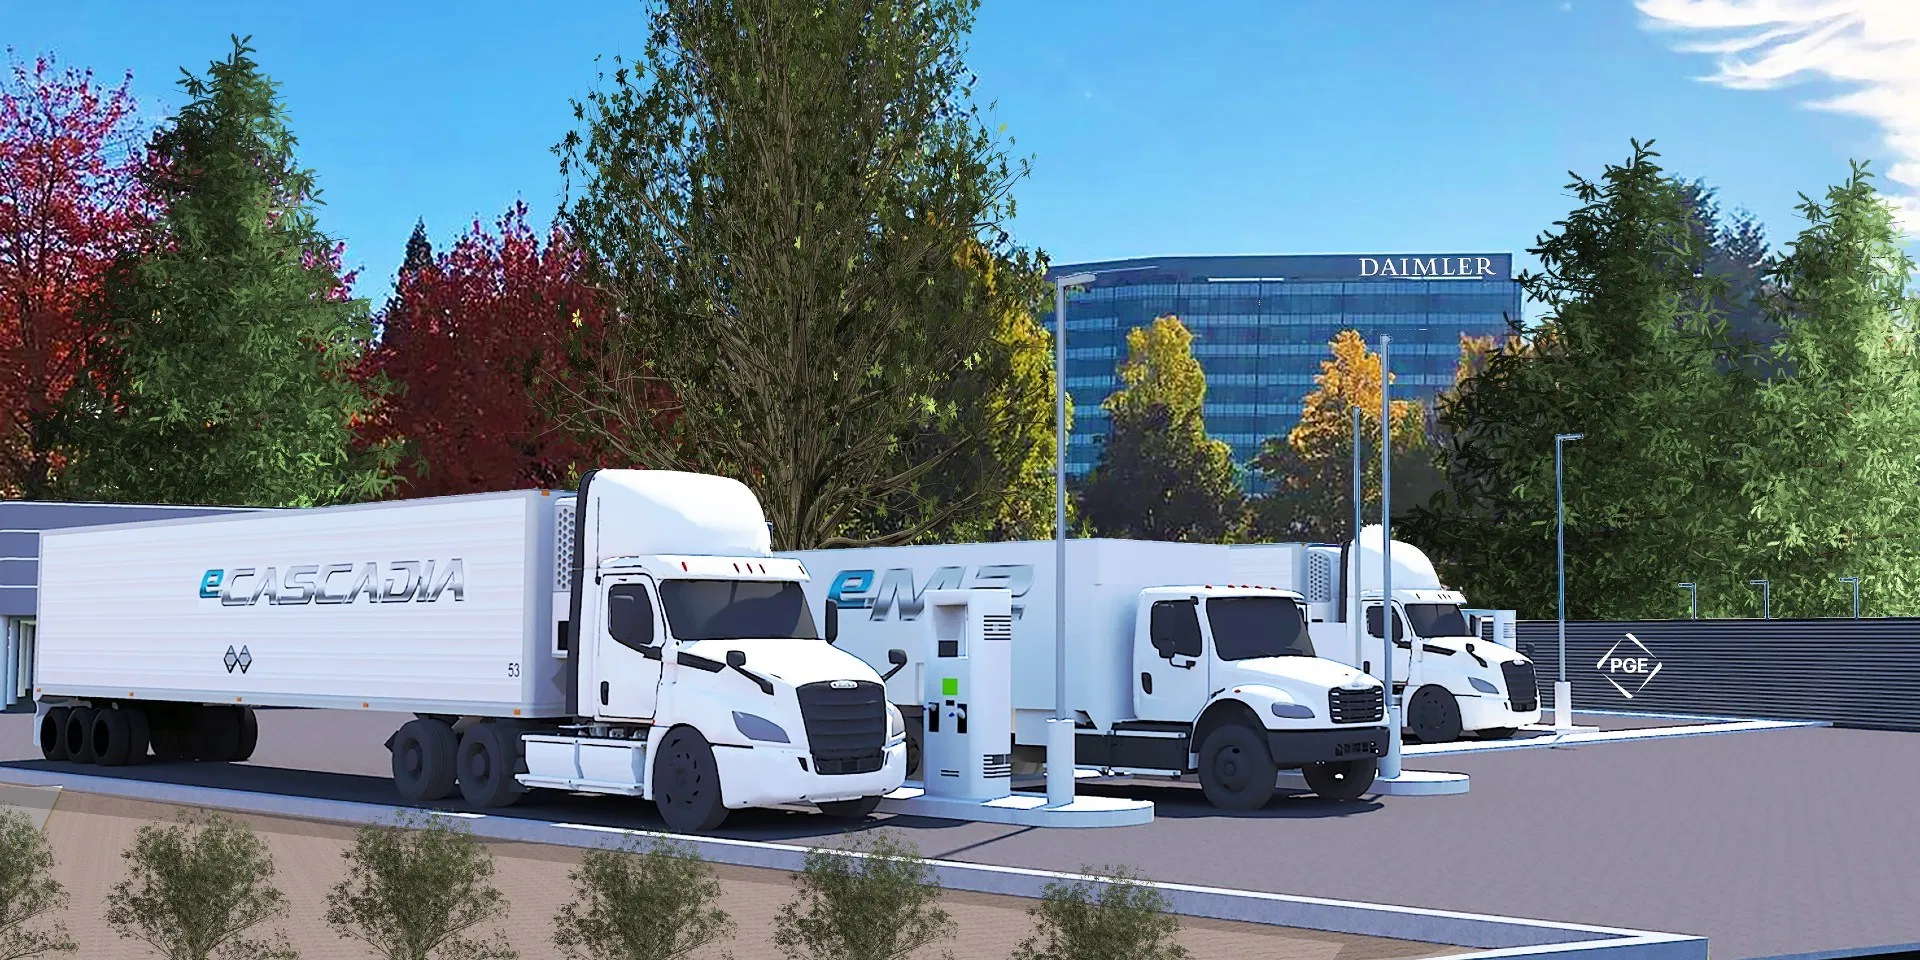 Portland and Daimler team up for 5MW electric semi public charging ‘Island’